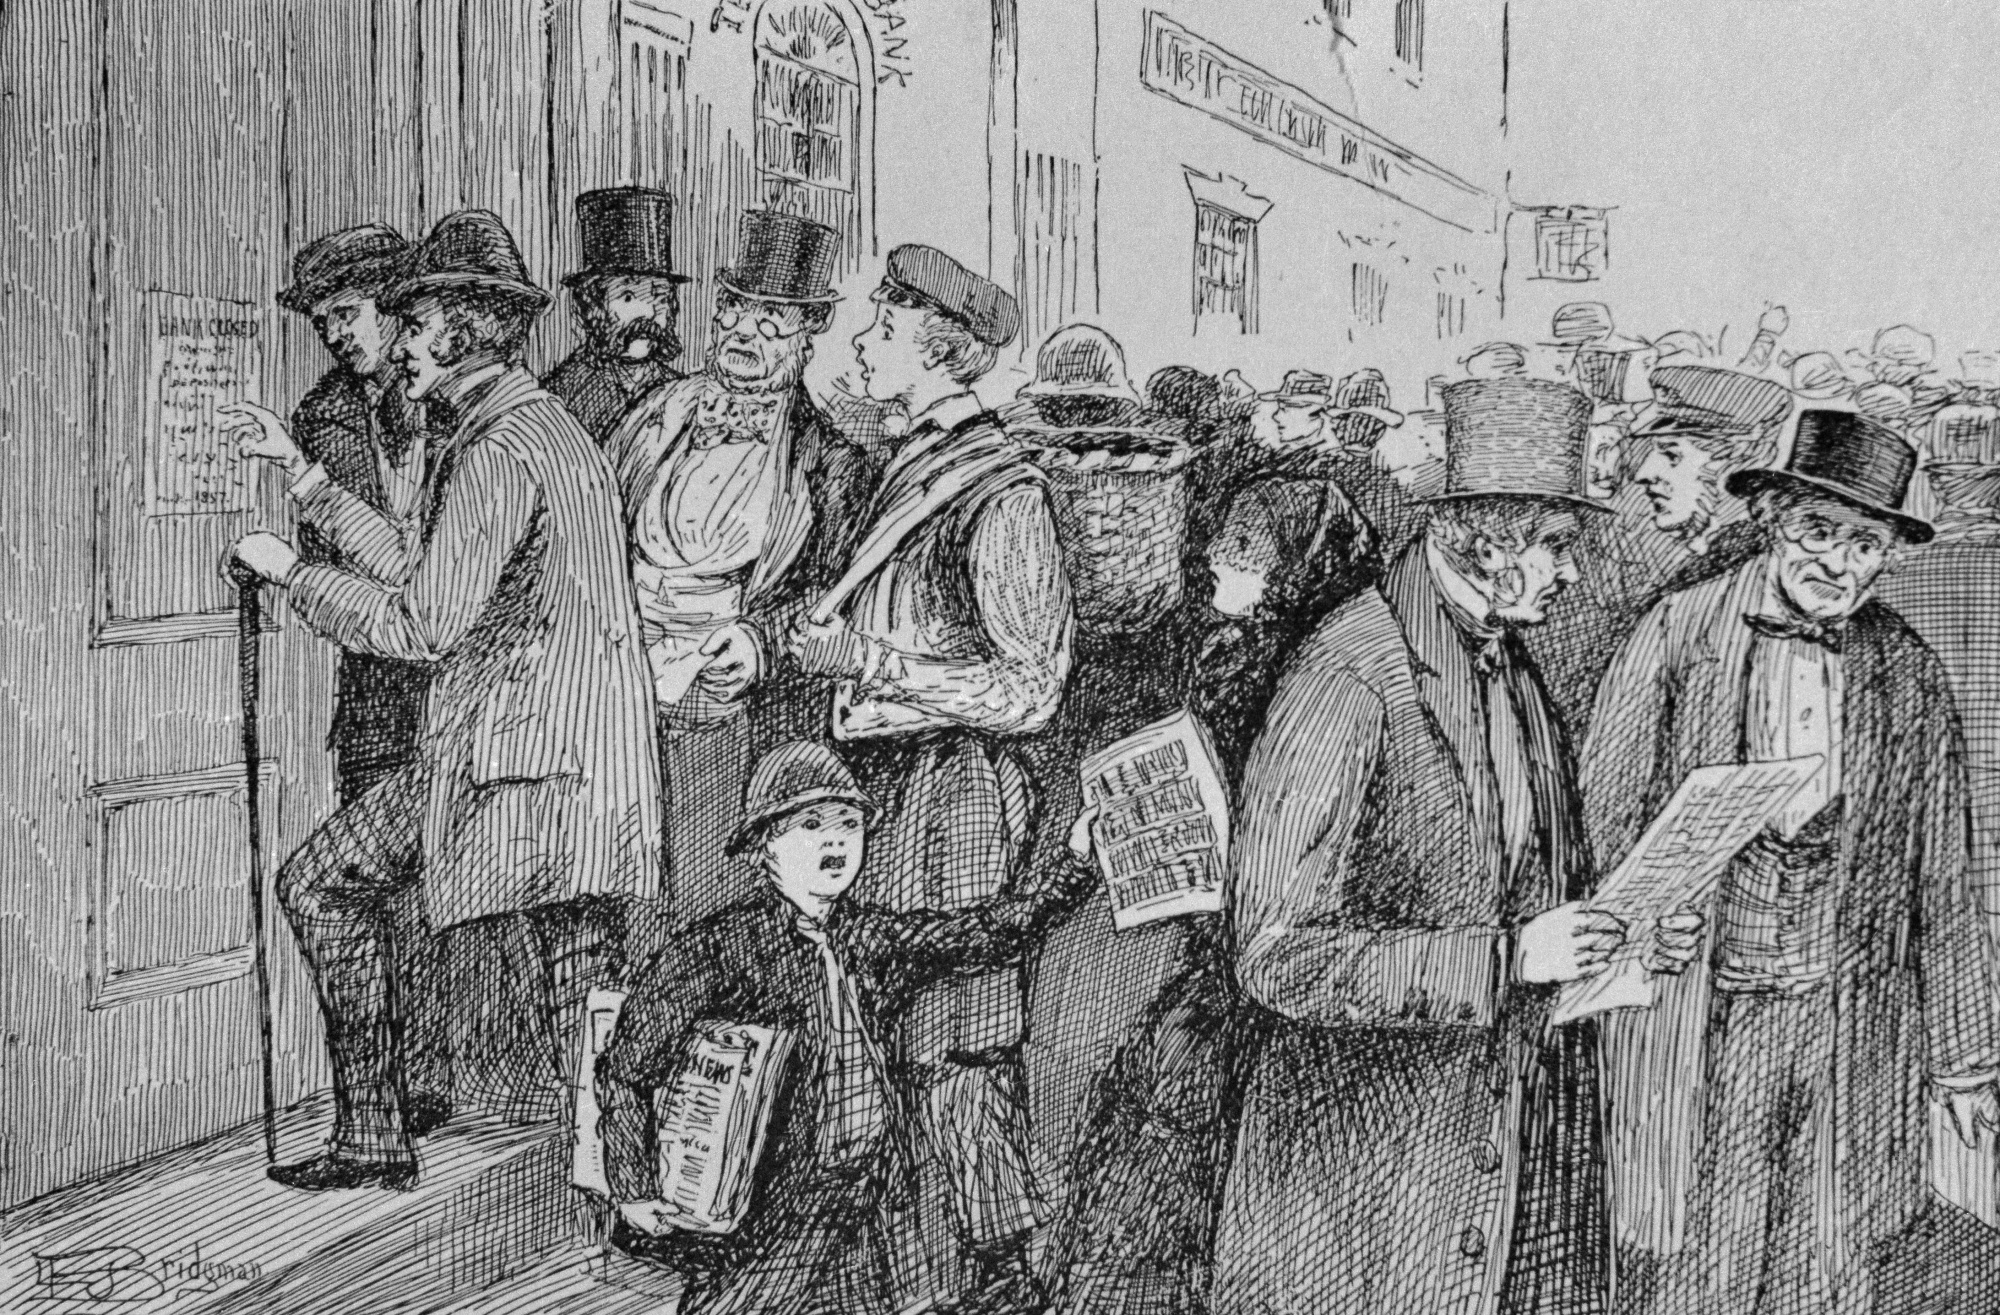 Financial panic of 1857 in New York.